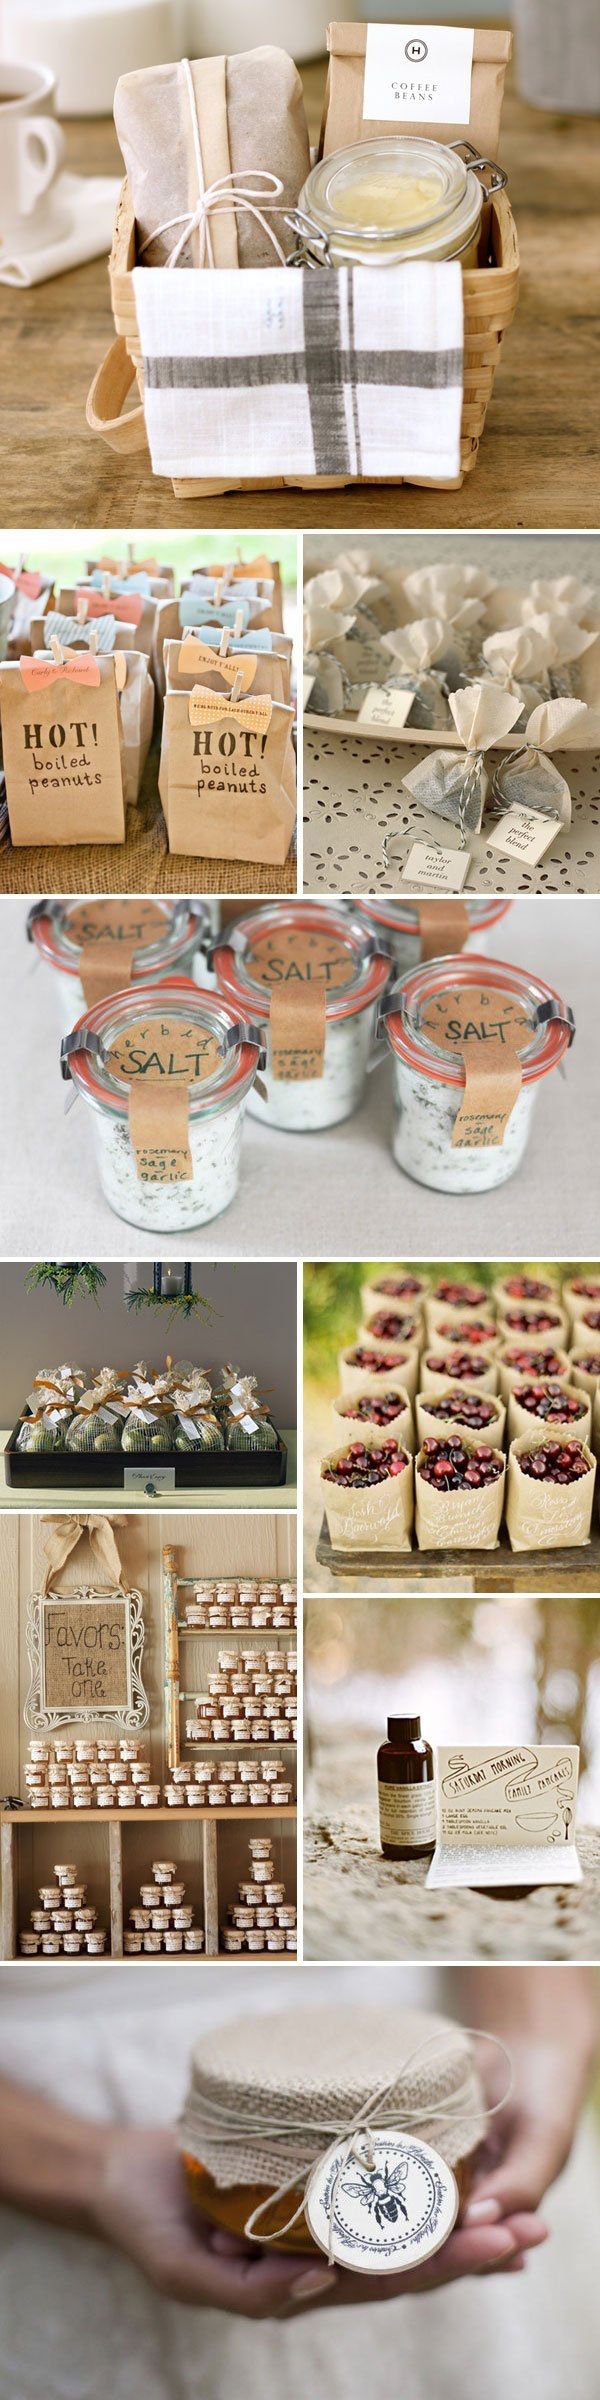 Packaging ideas for handmade gifts of food and more.